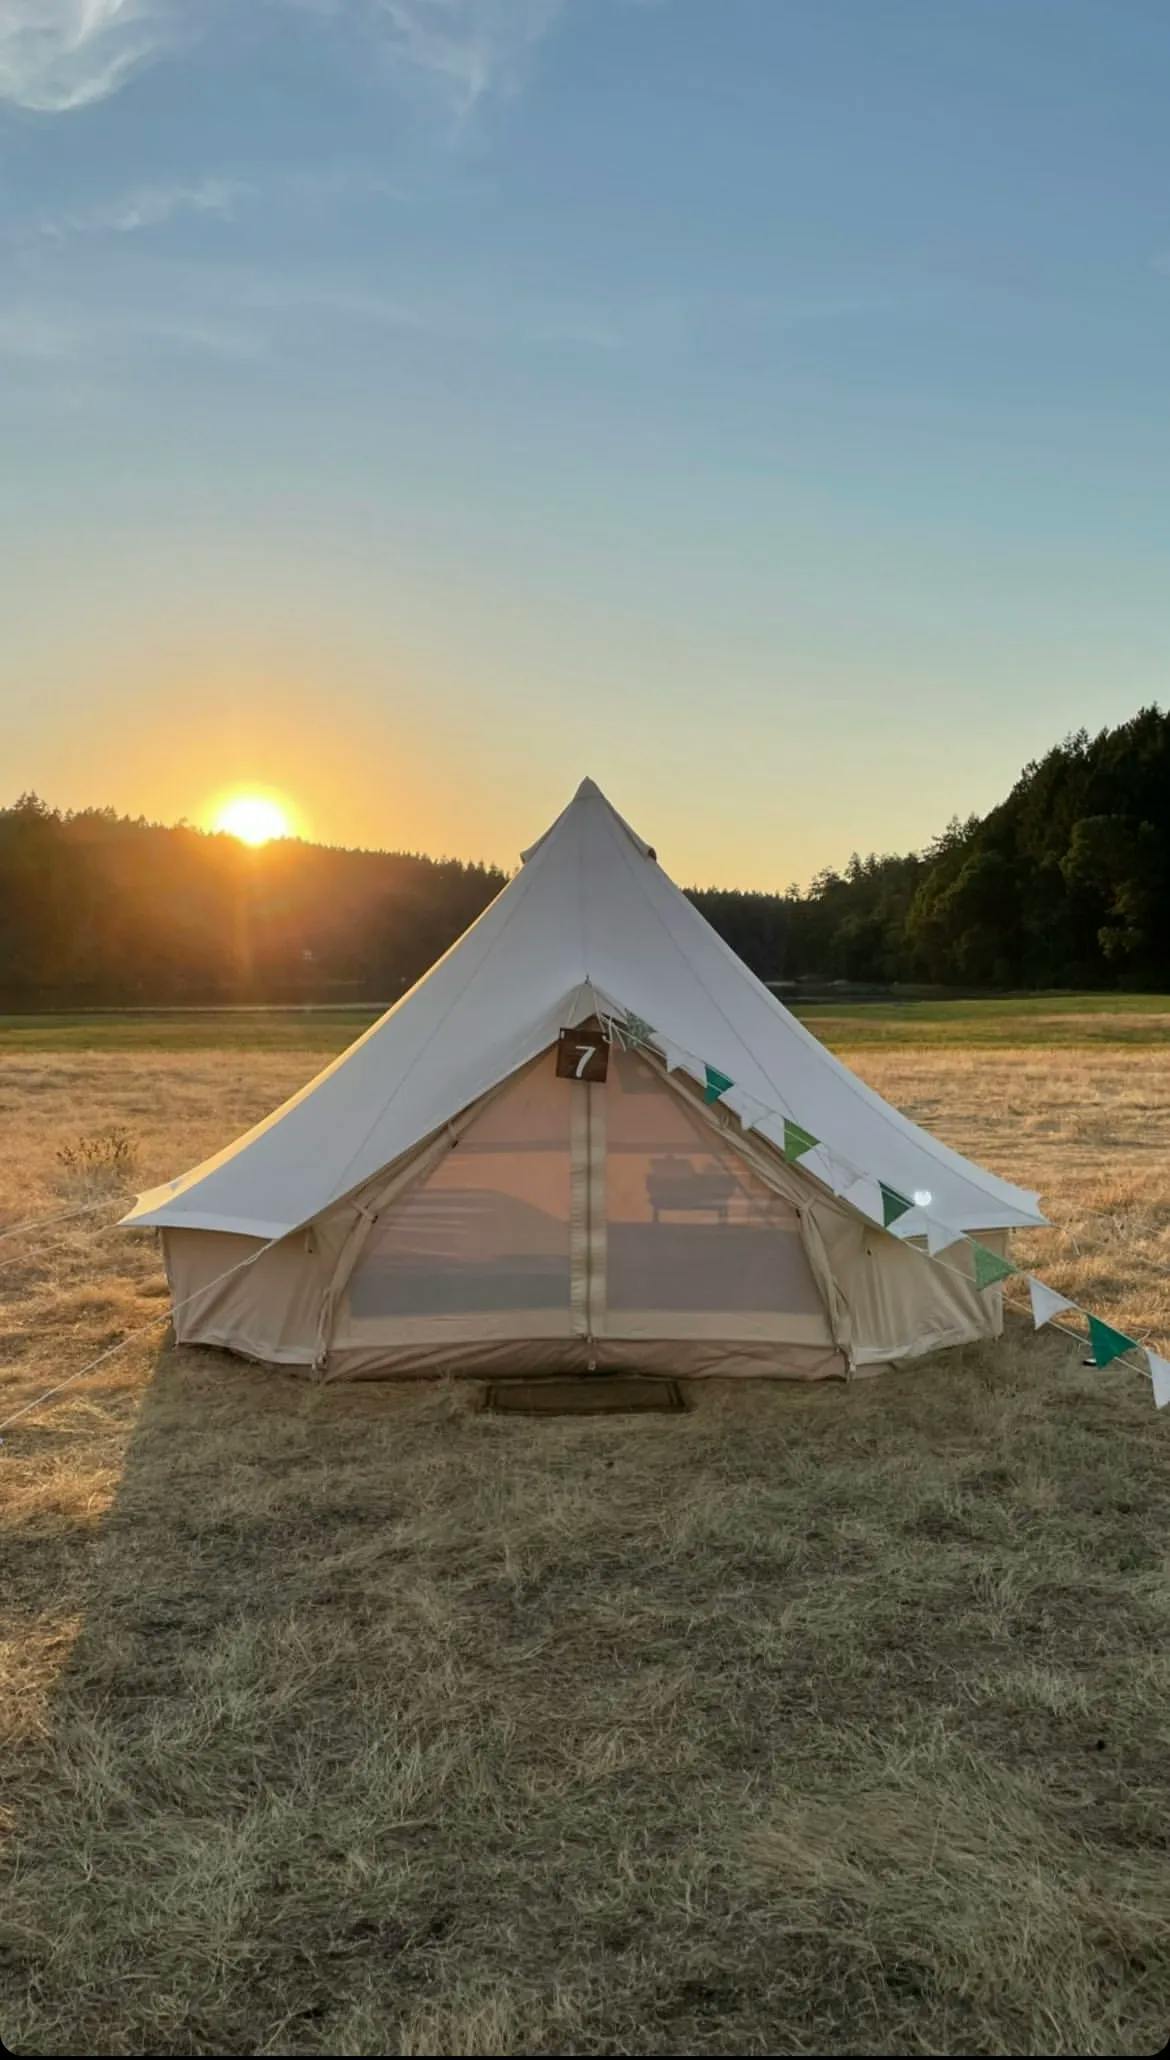 Tent in an open field at sunset with warm sky.